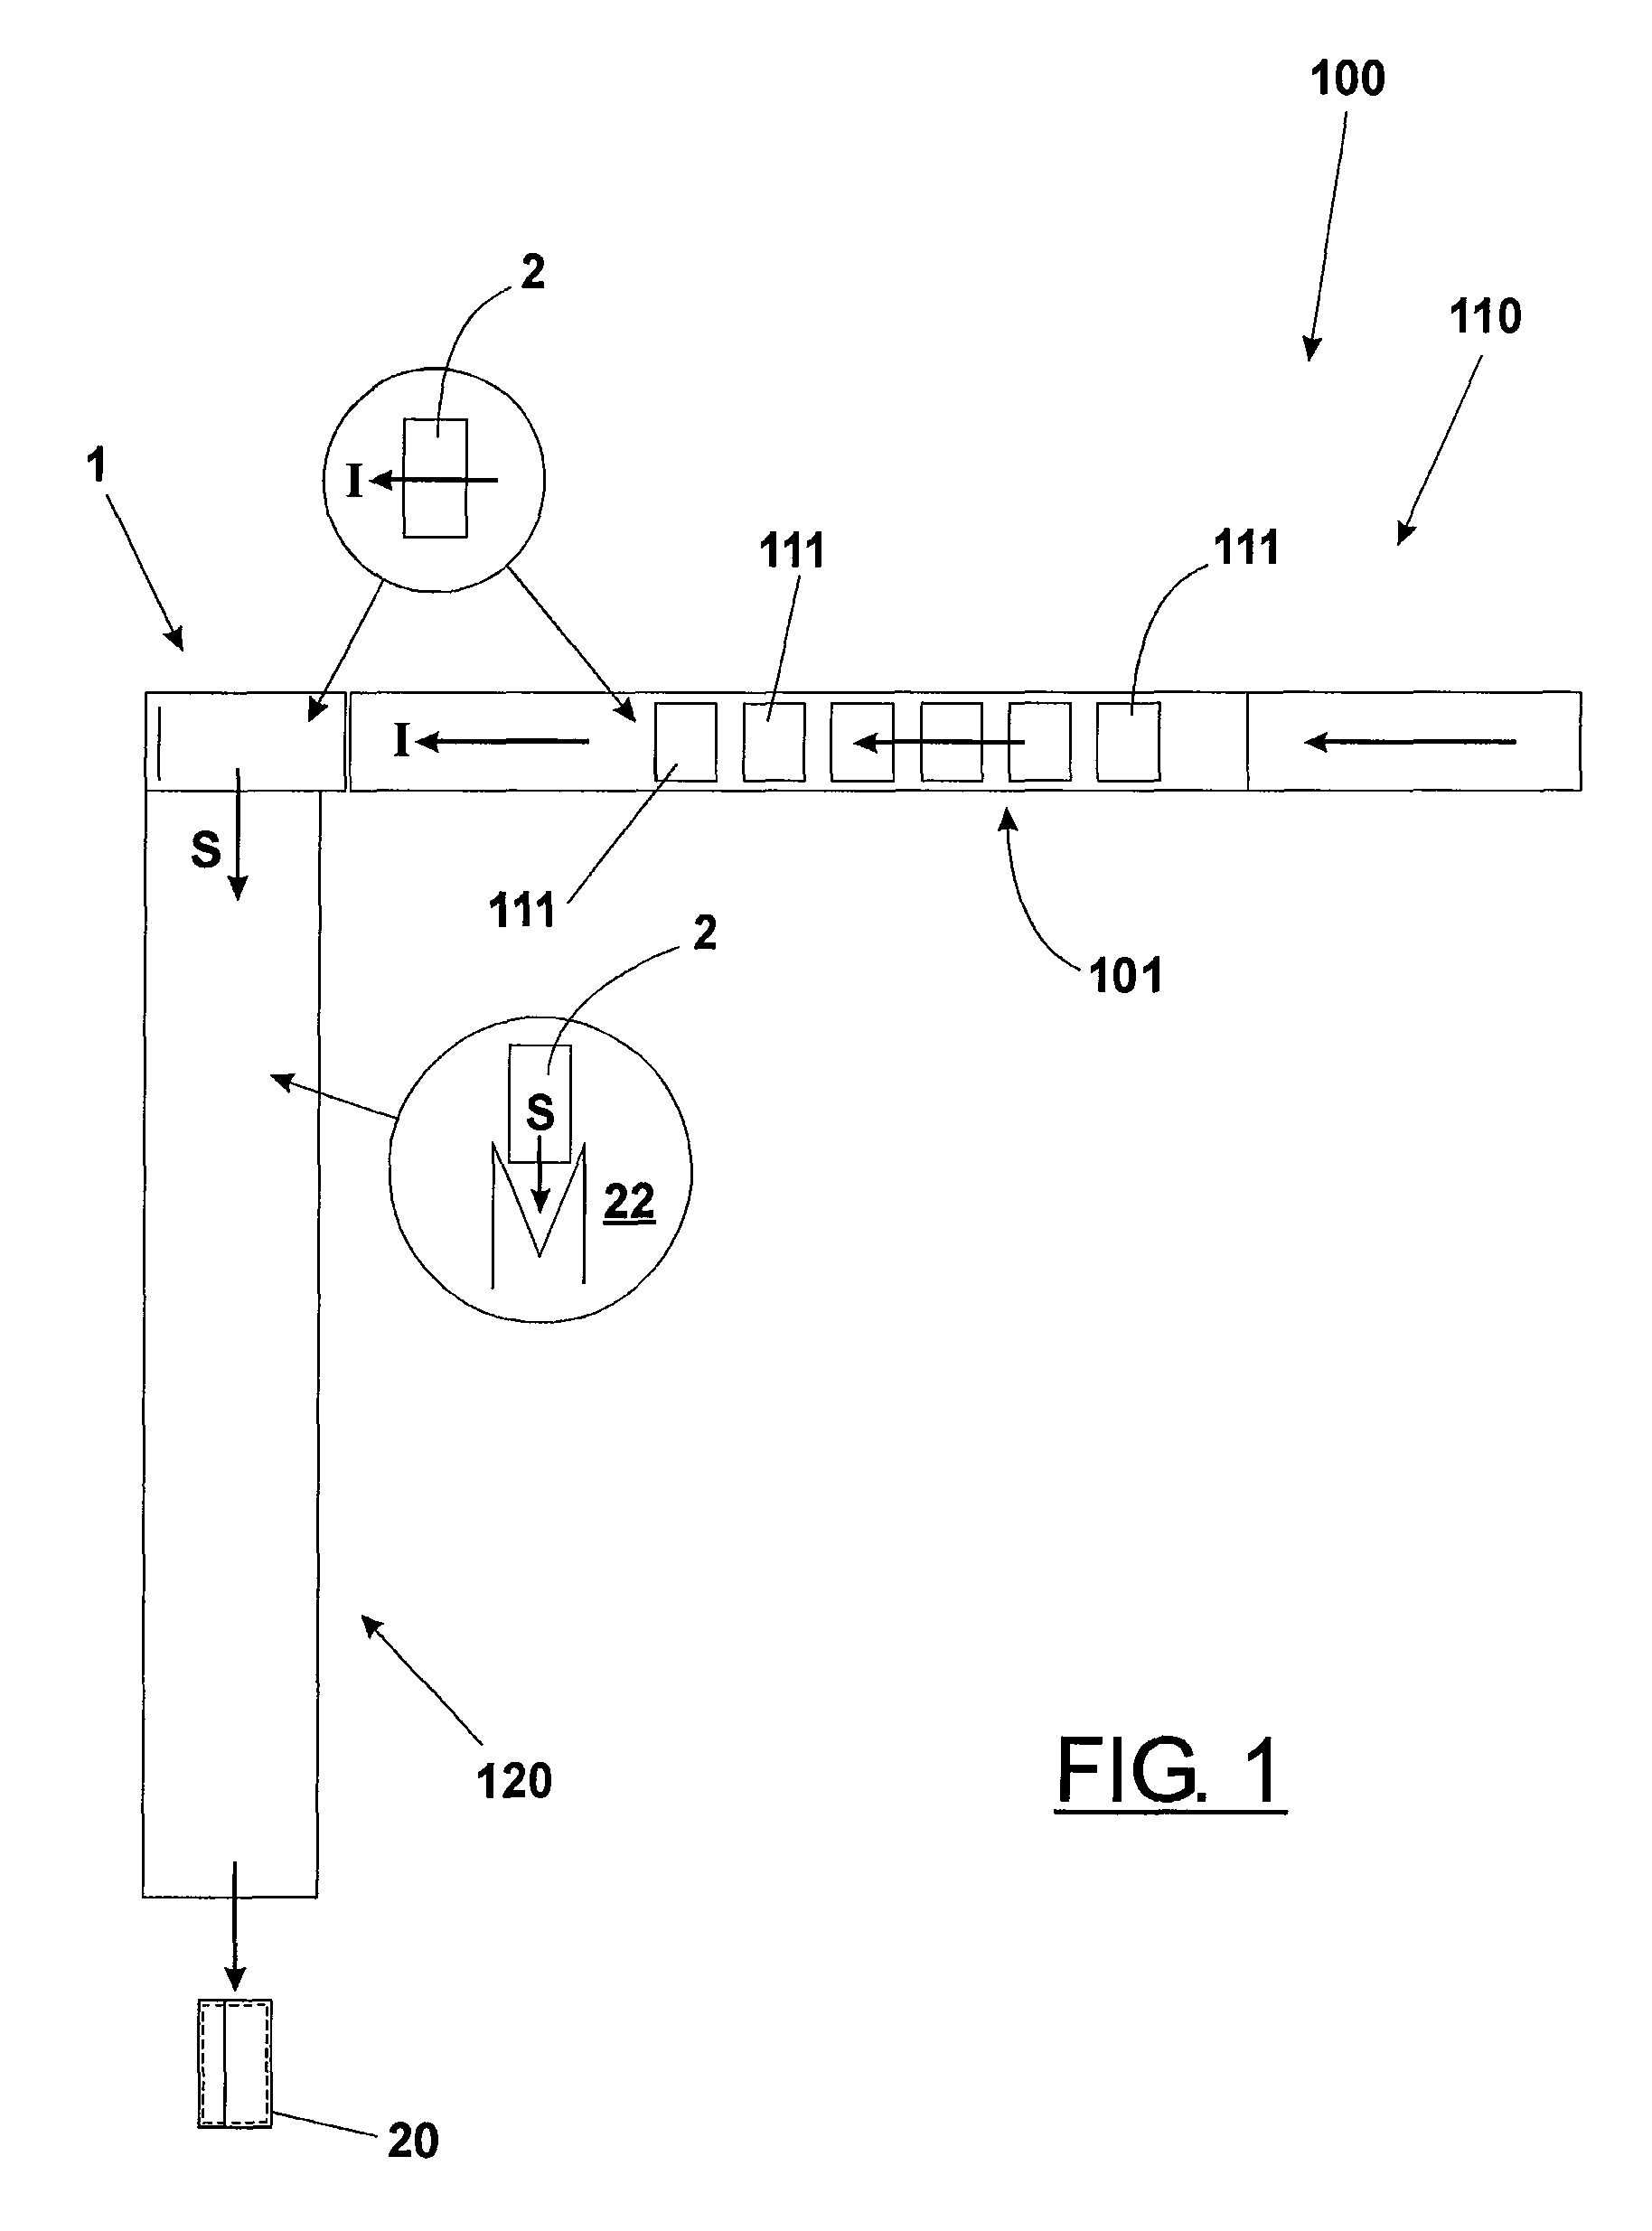 Apparatus for changing an advancement direction of piles of inserts to be stuffed in envelopes